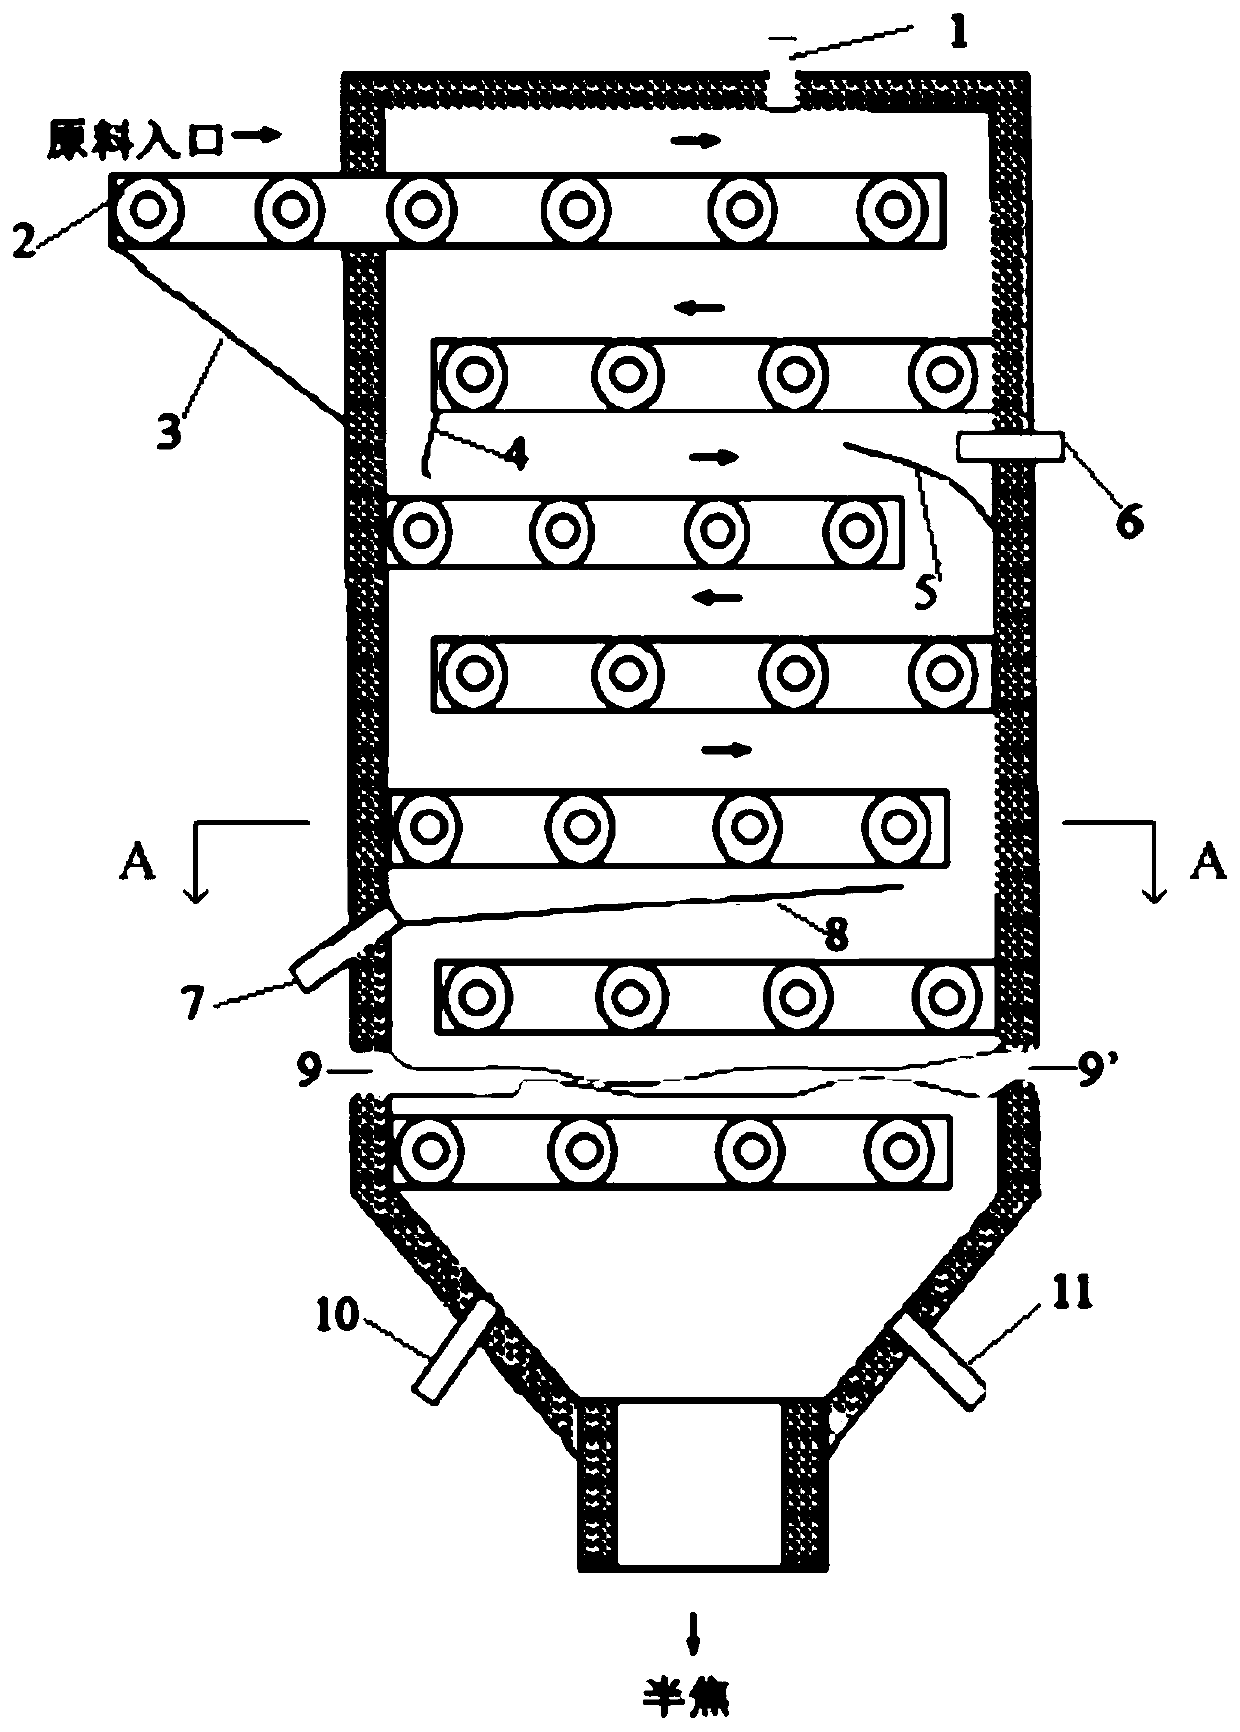 A drying-pyrolysis integrated vertical furnace